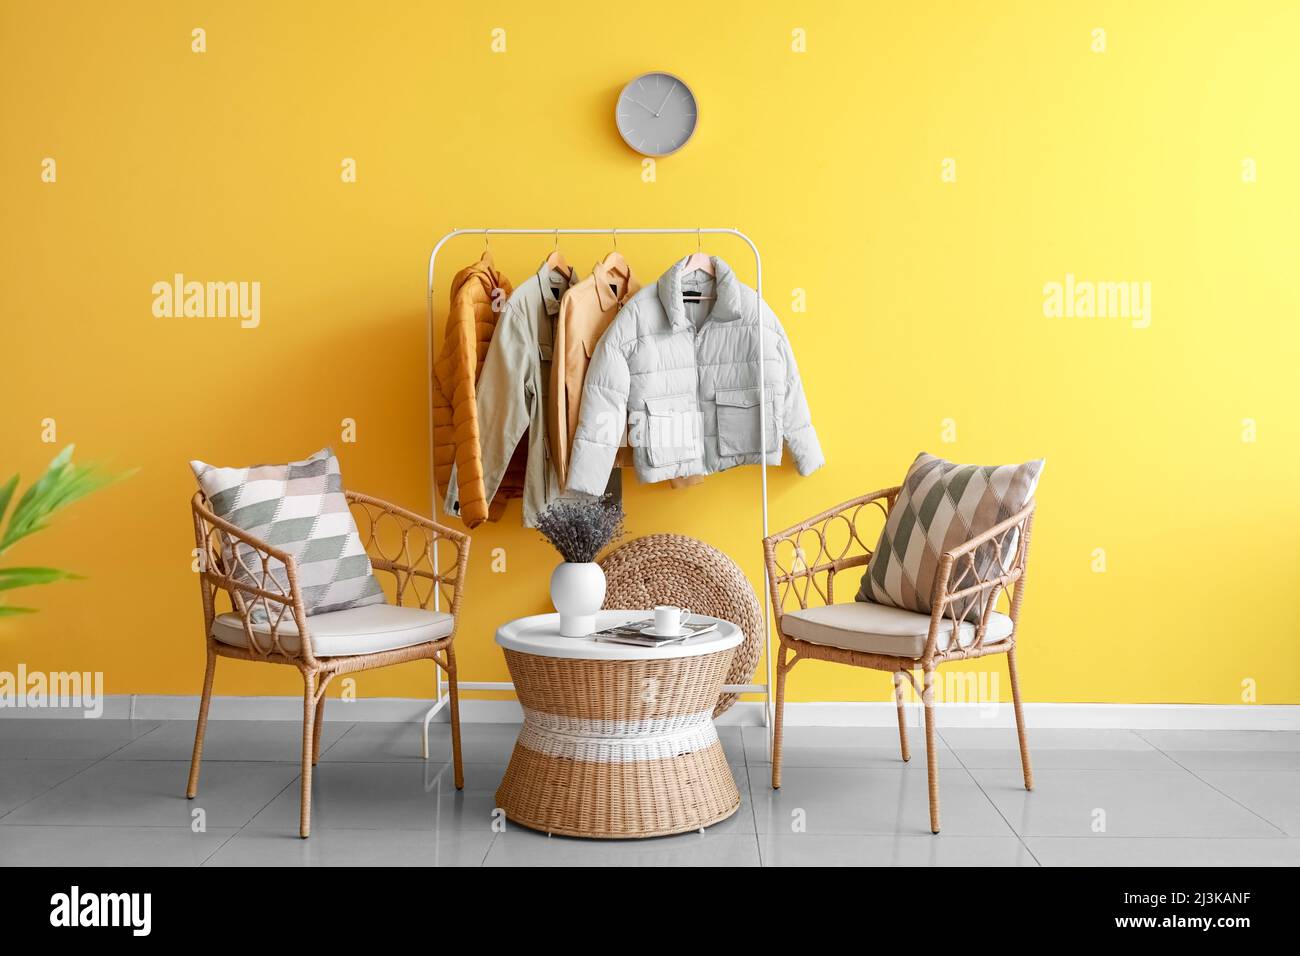 Interior of room with comfortable chairs and hanger with jackets near color wall Stock Photo